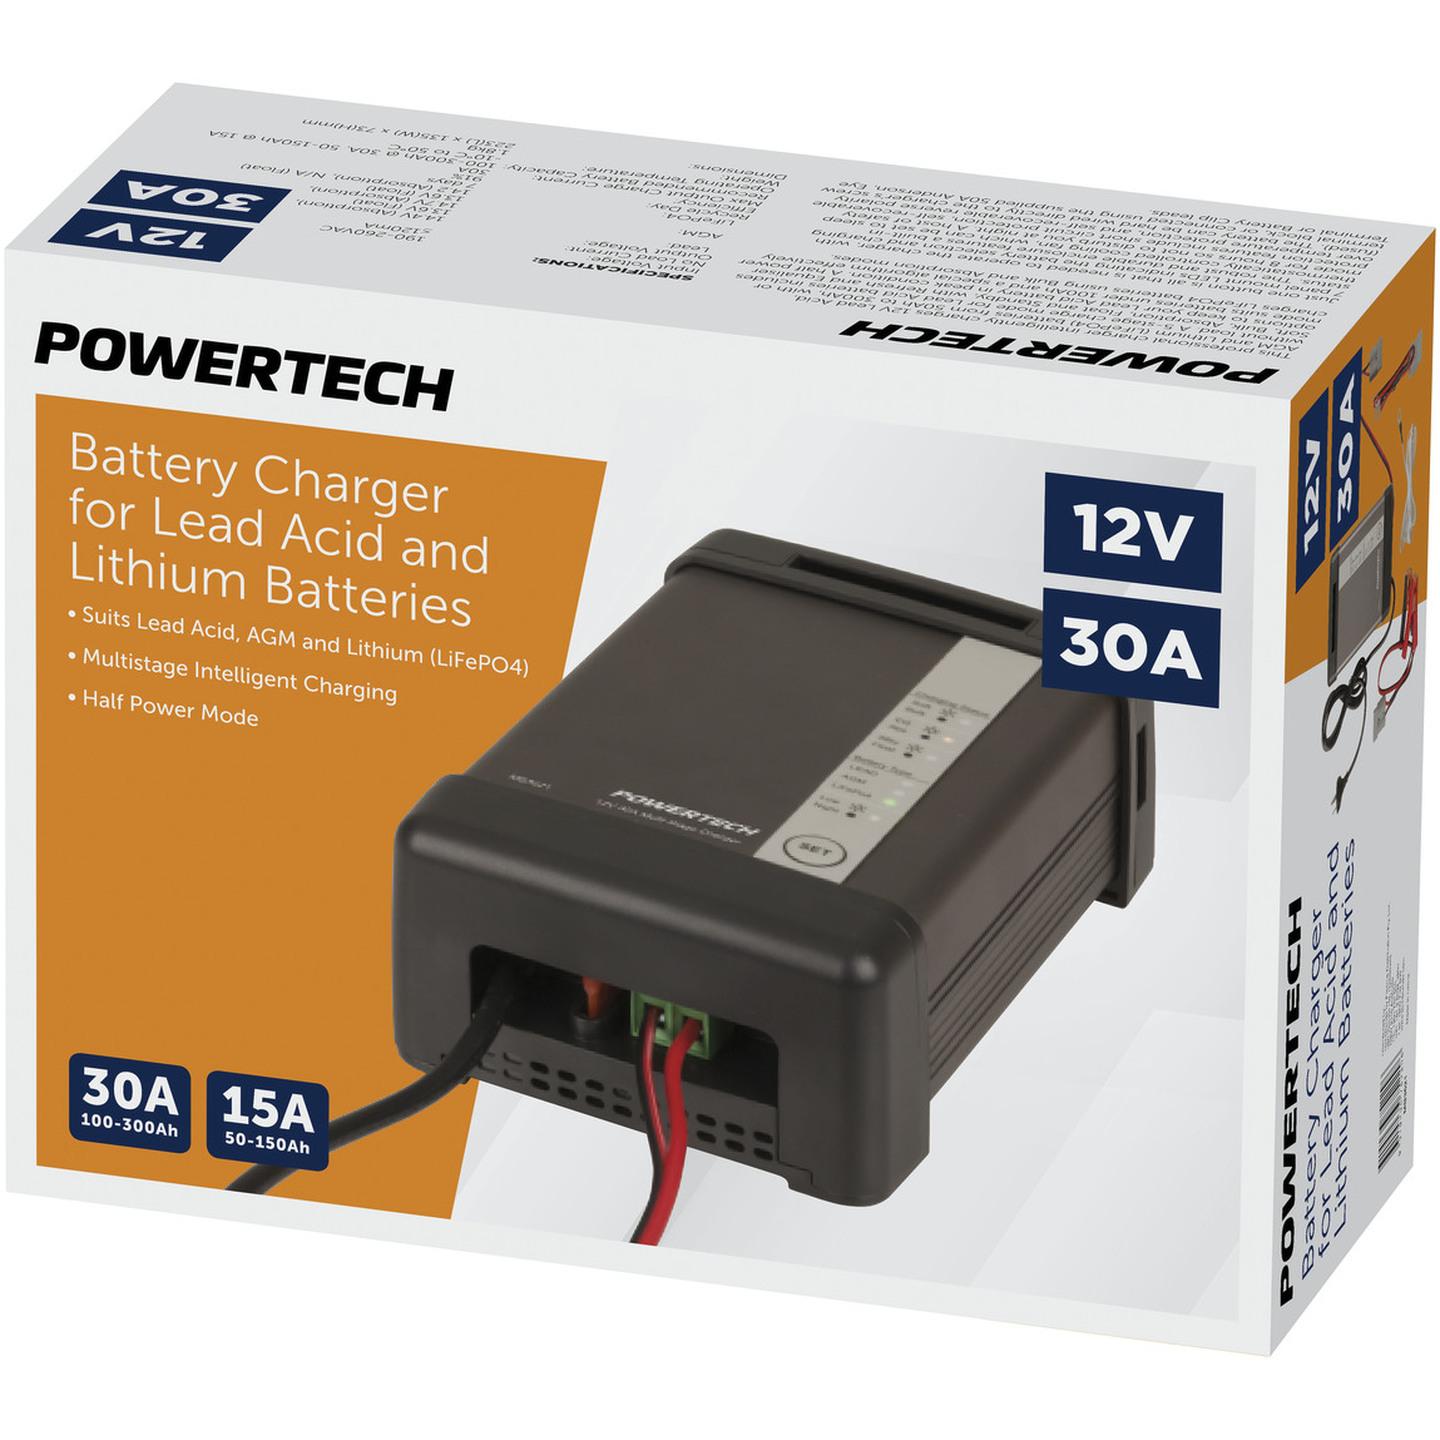  Multi-Stage Charger for Lithium and Lead Acid Batteries 12V 30A